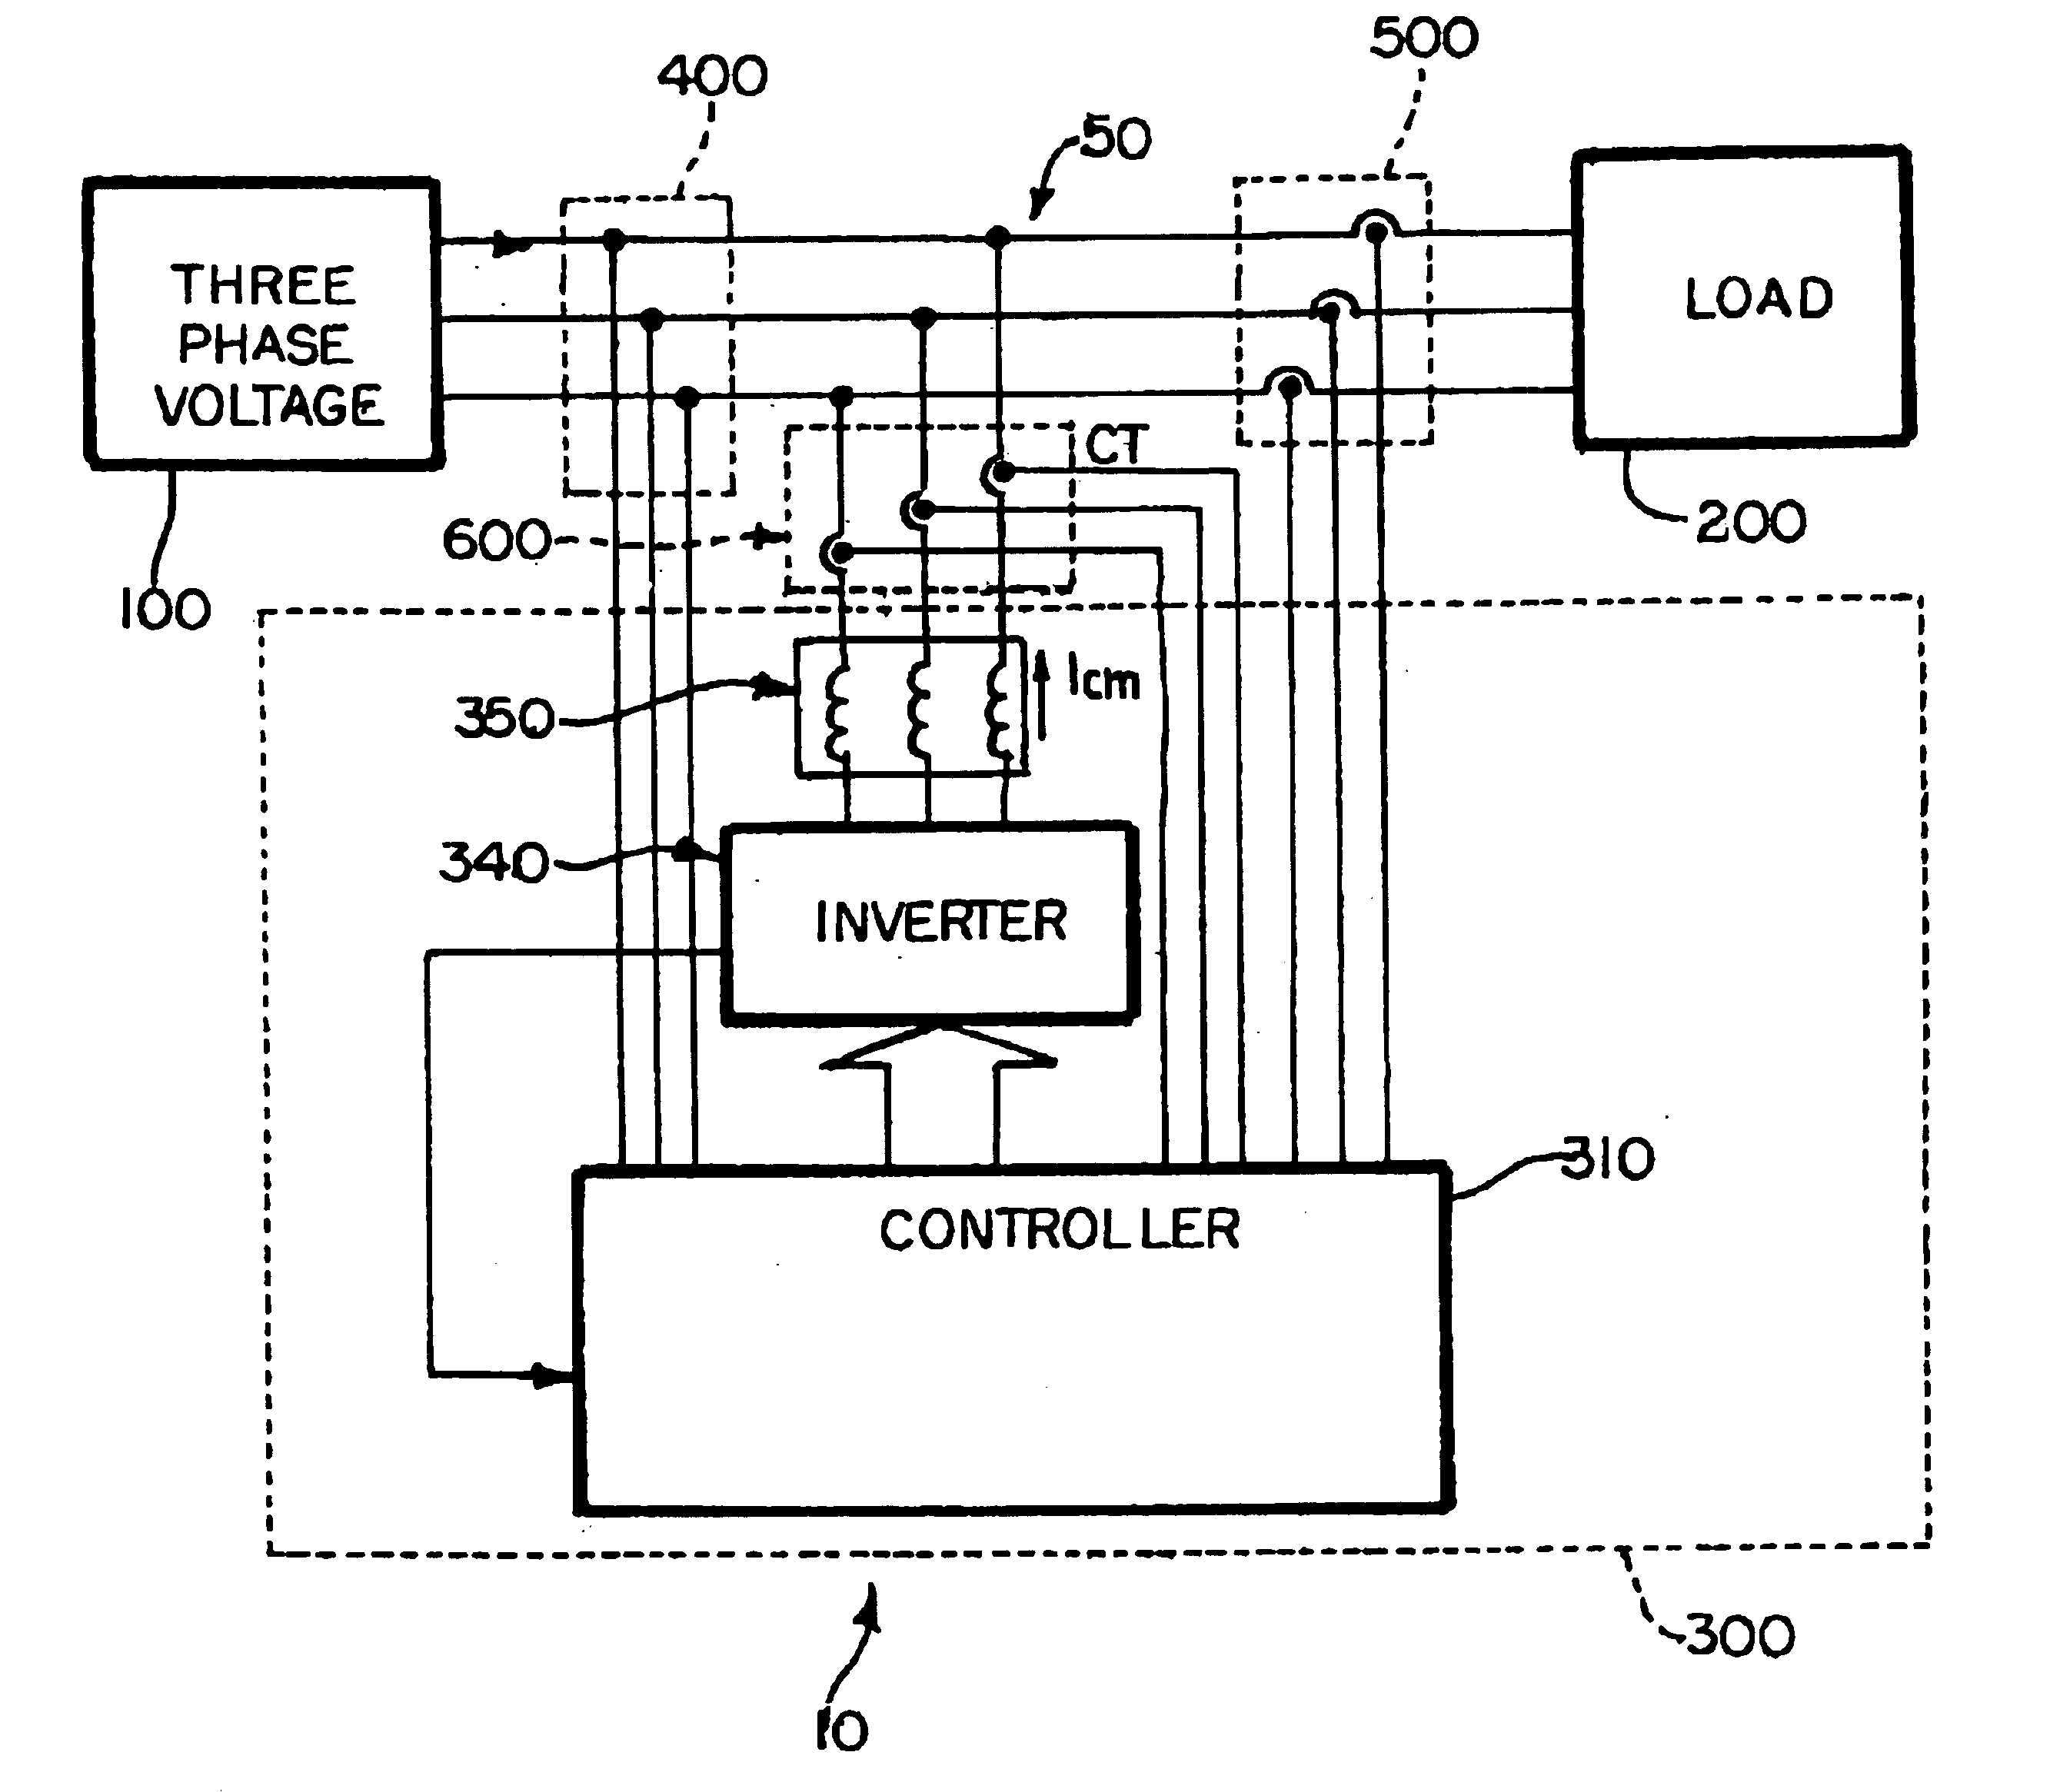 Active filter for multi-phase AC power system